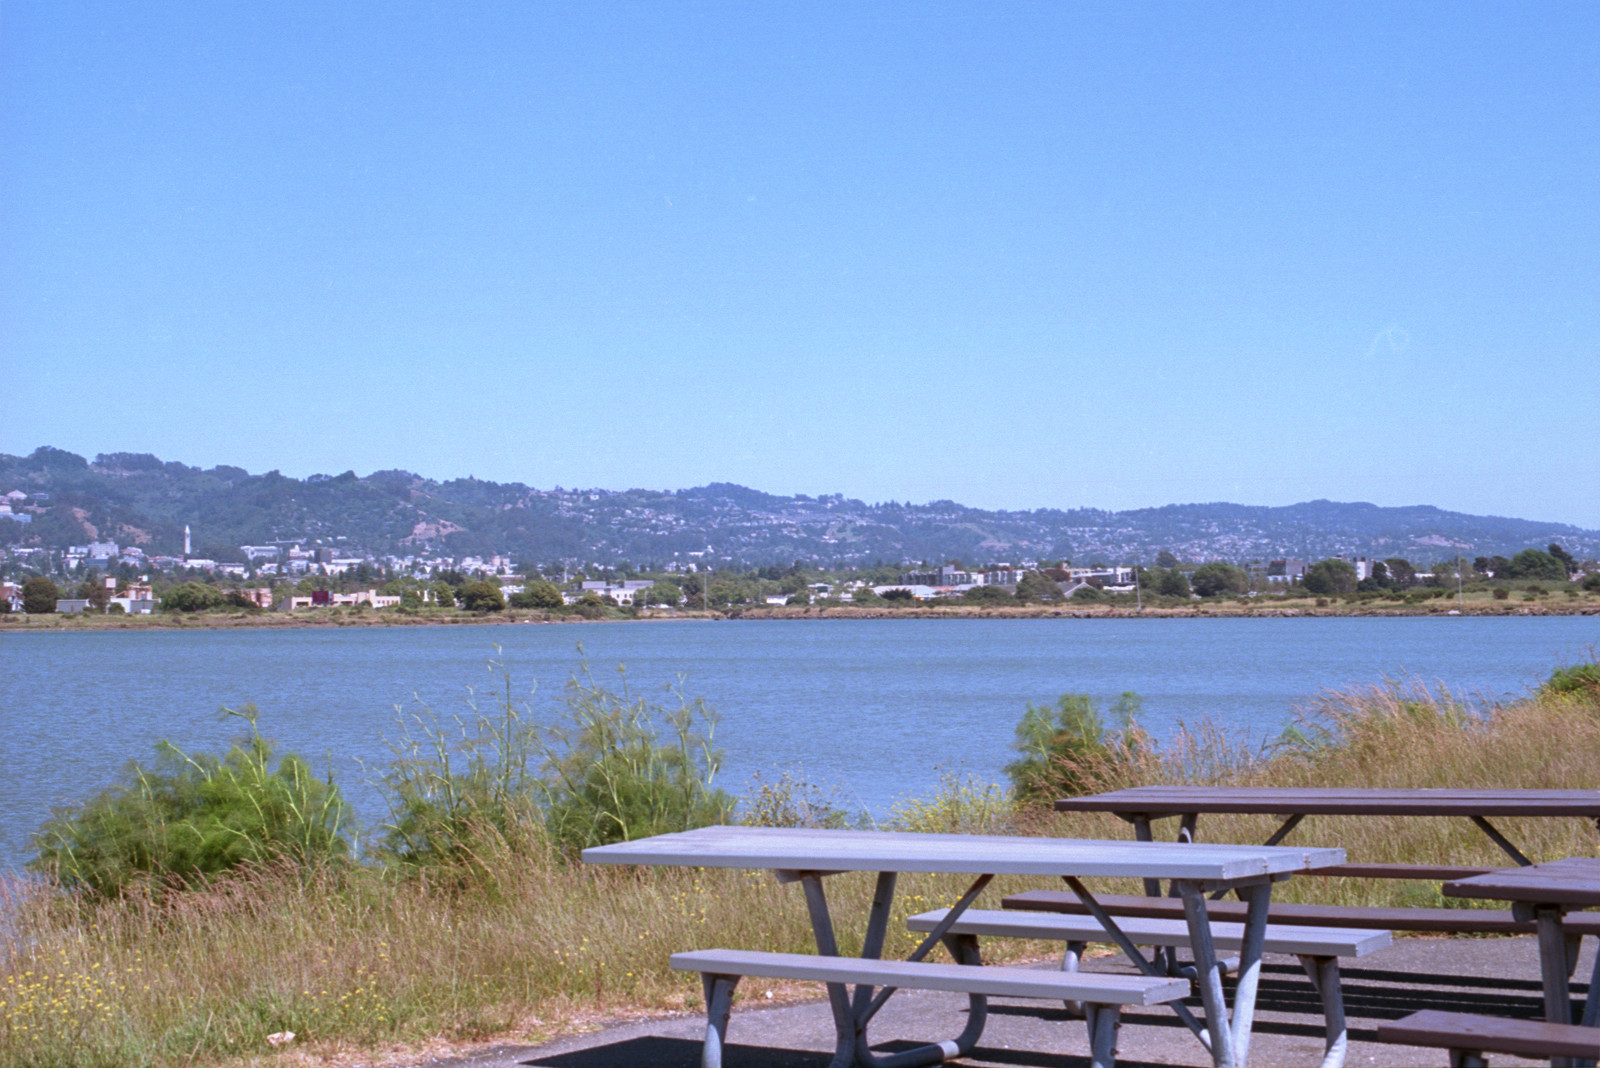 By the Bay Picnic Tables · View from Berkeley Marina toward East Bay